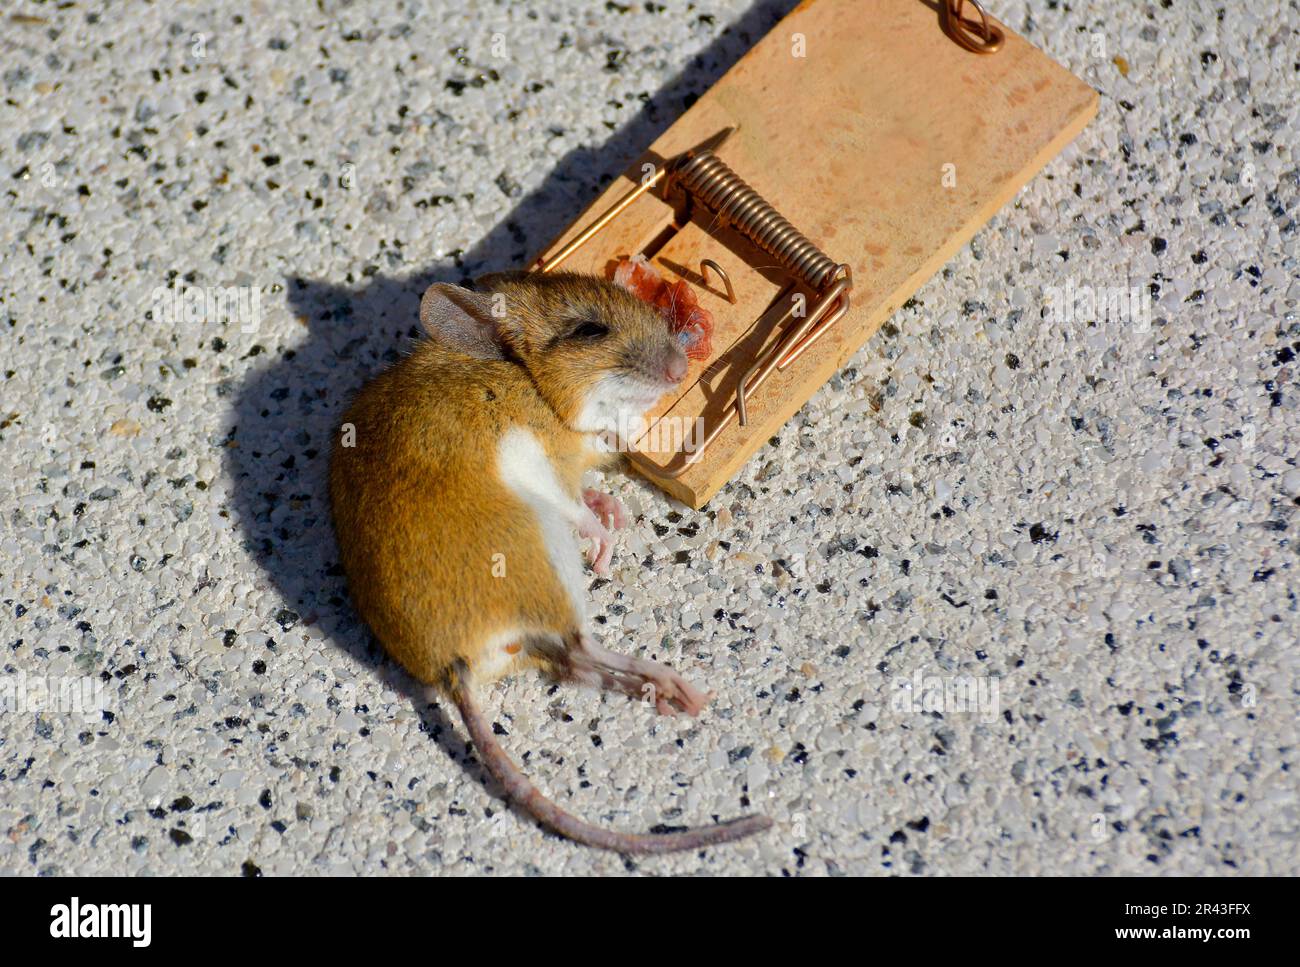 https://c8.alamy.com/comp/2R43FFX/mouse-in-the-mousetrap-with-bacon-you-catch-mice-house-mouse-mus-musculus-2R43FFX.jpg